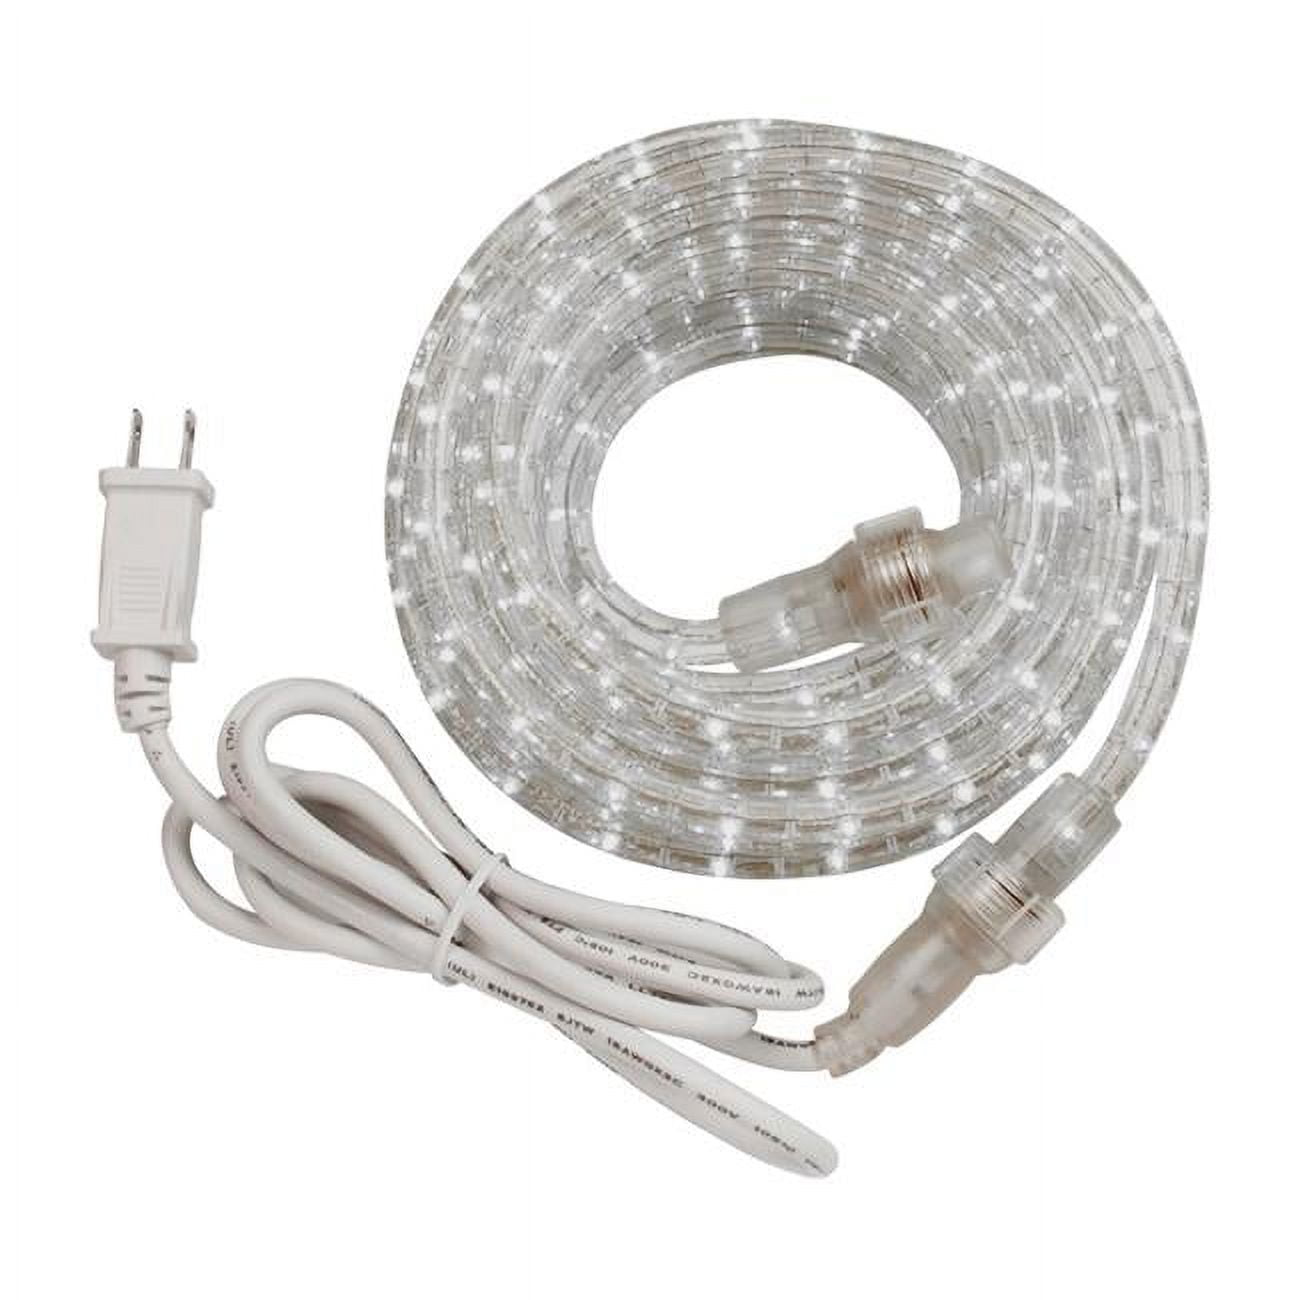 Picture of Amertac 9783093 24 ft. Decorative Clear Rope Light